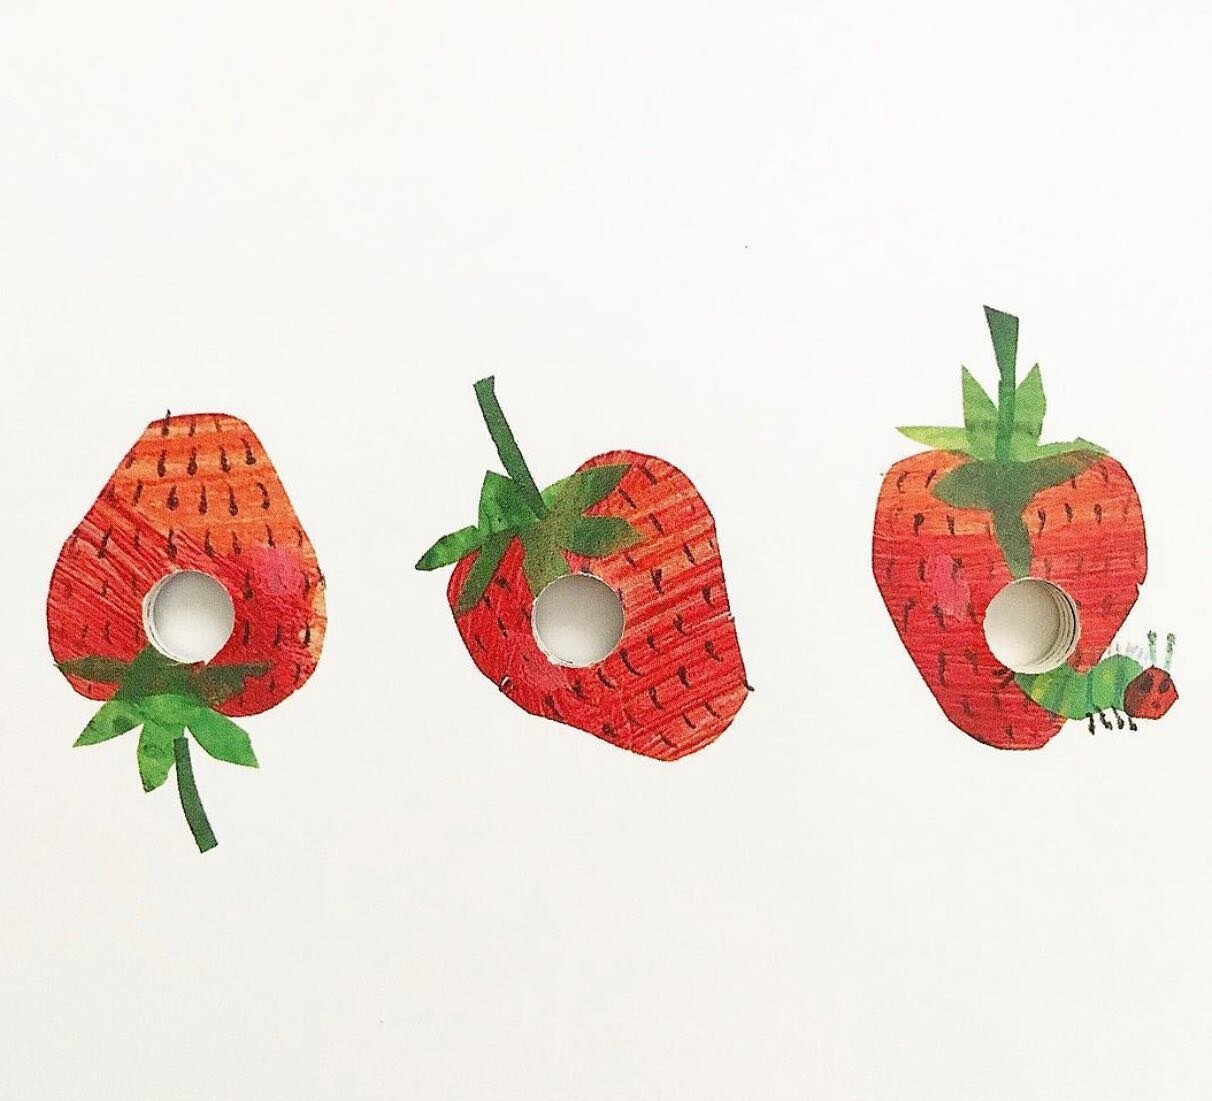 Same.
.
From The Very Hungry Caterpillar by Eric Carle, published 1969.